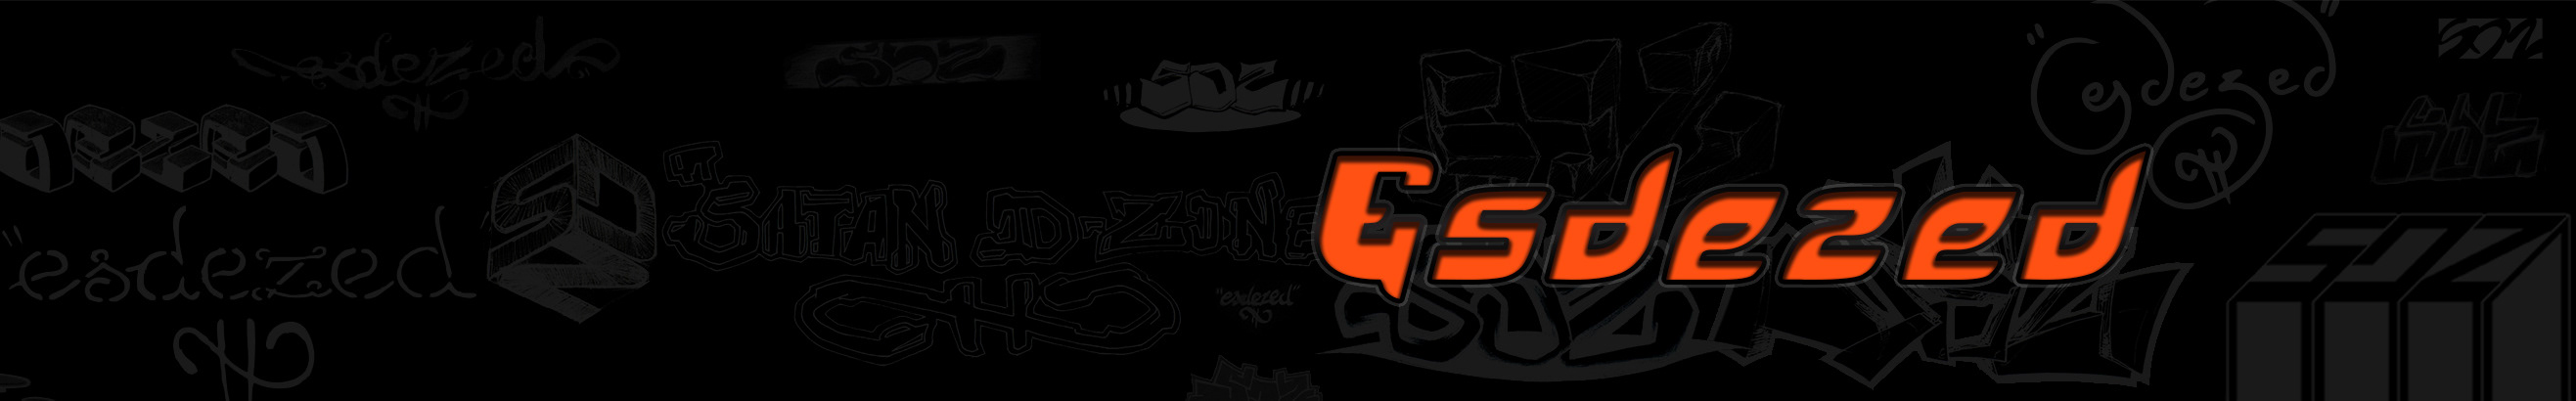 Esdezed's profile banner